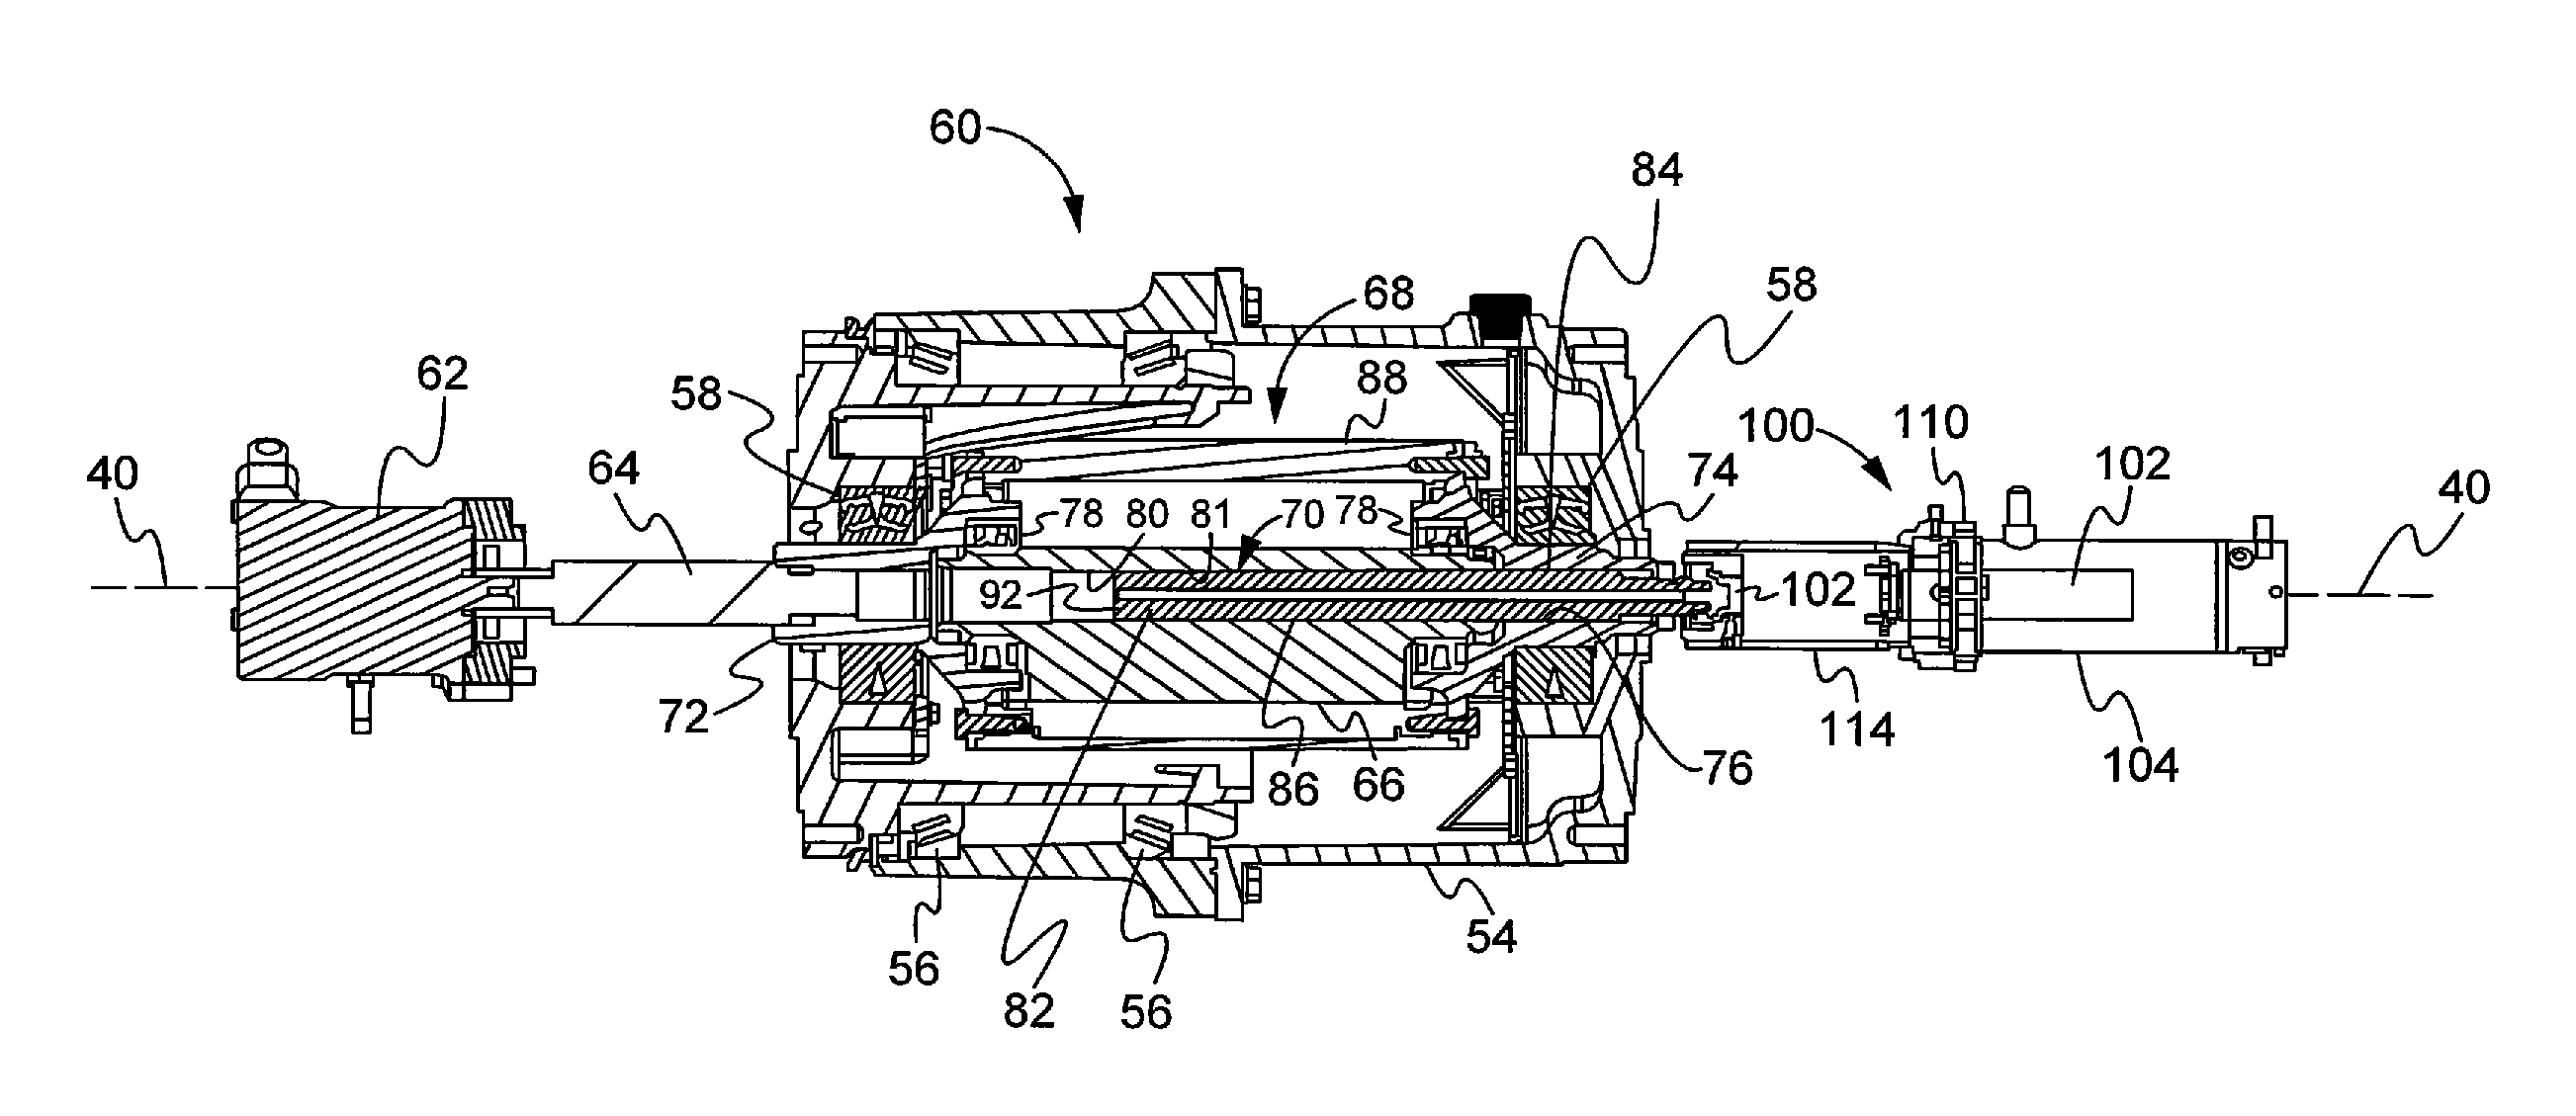 Apparatus for transferring linear loads